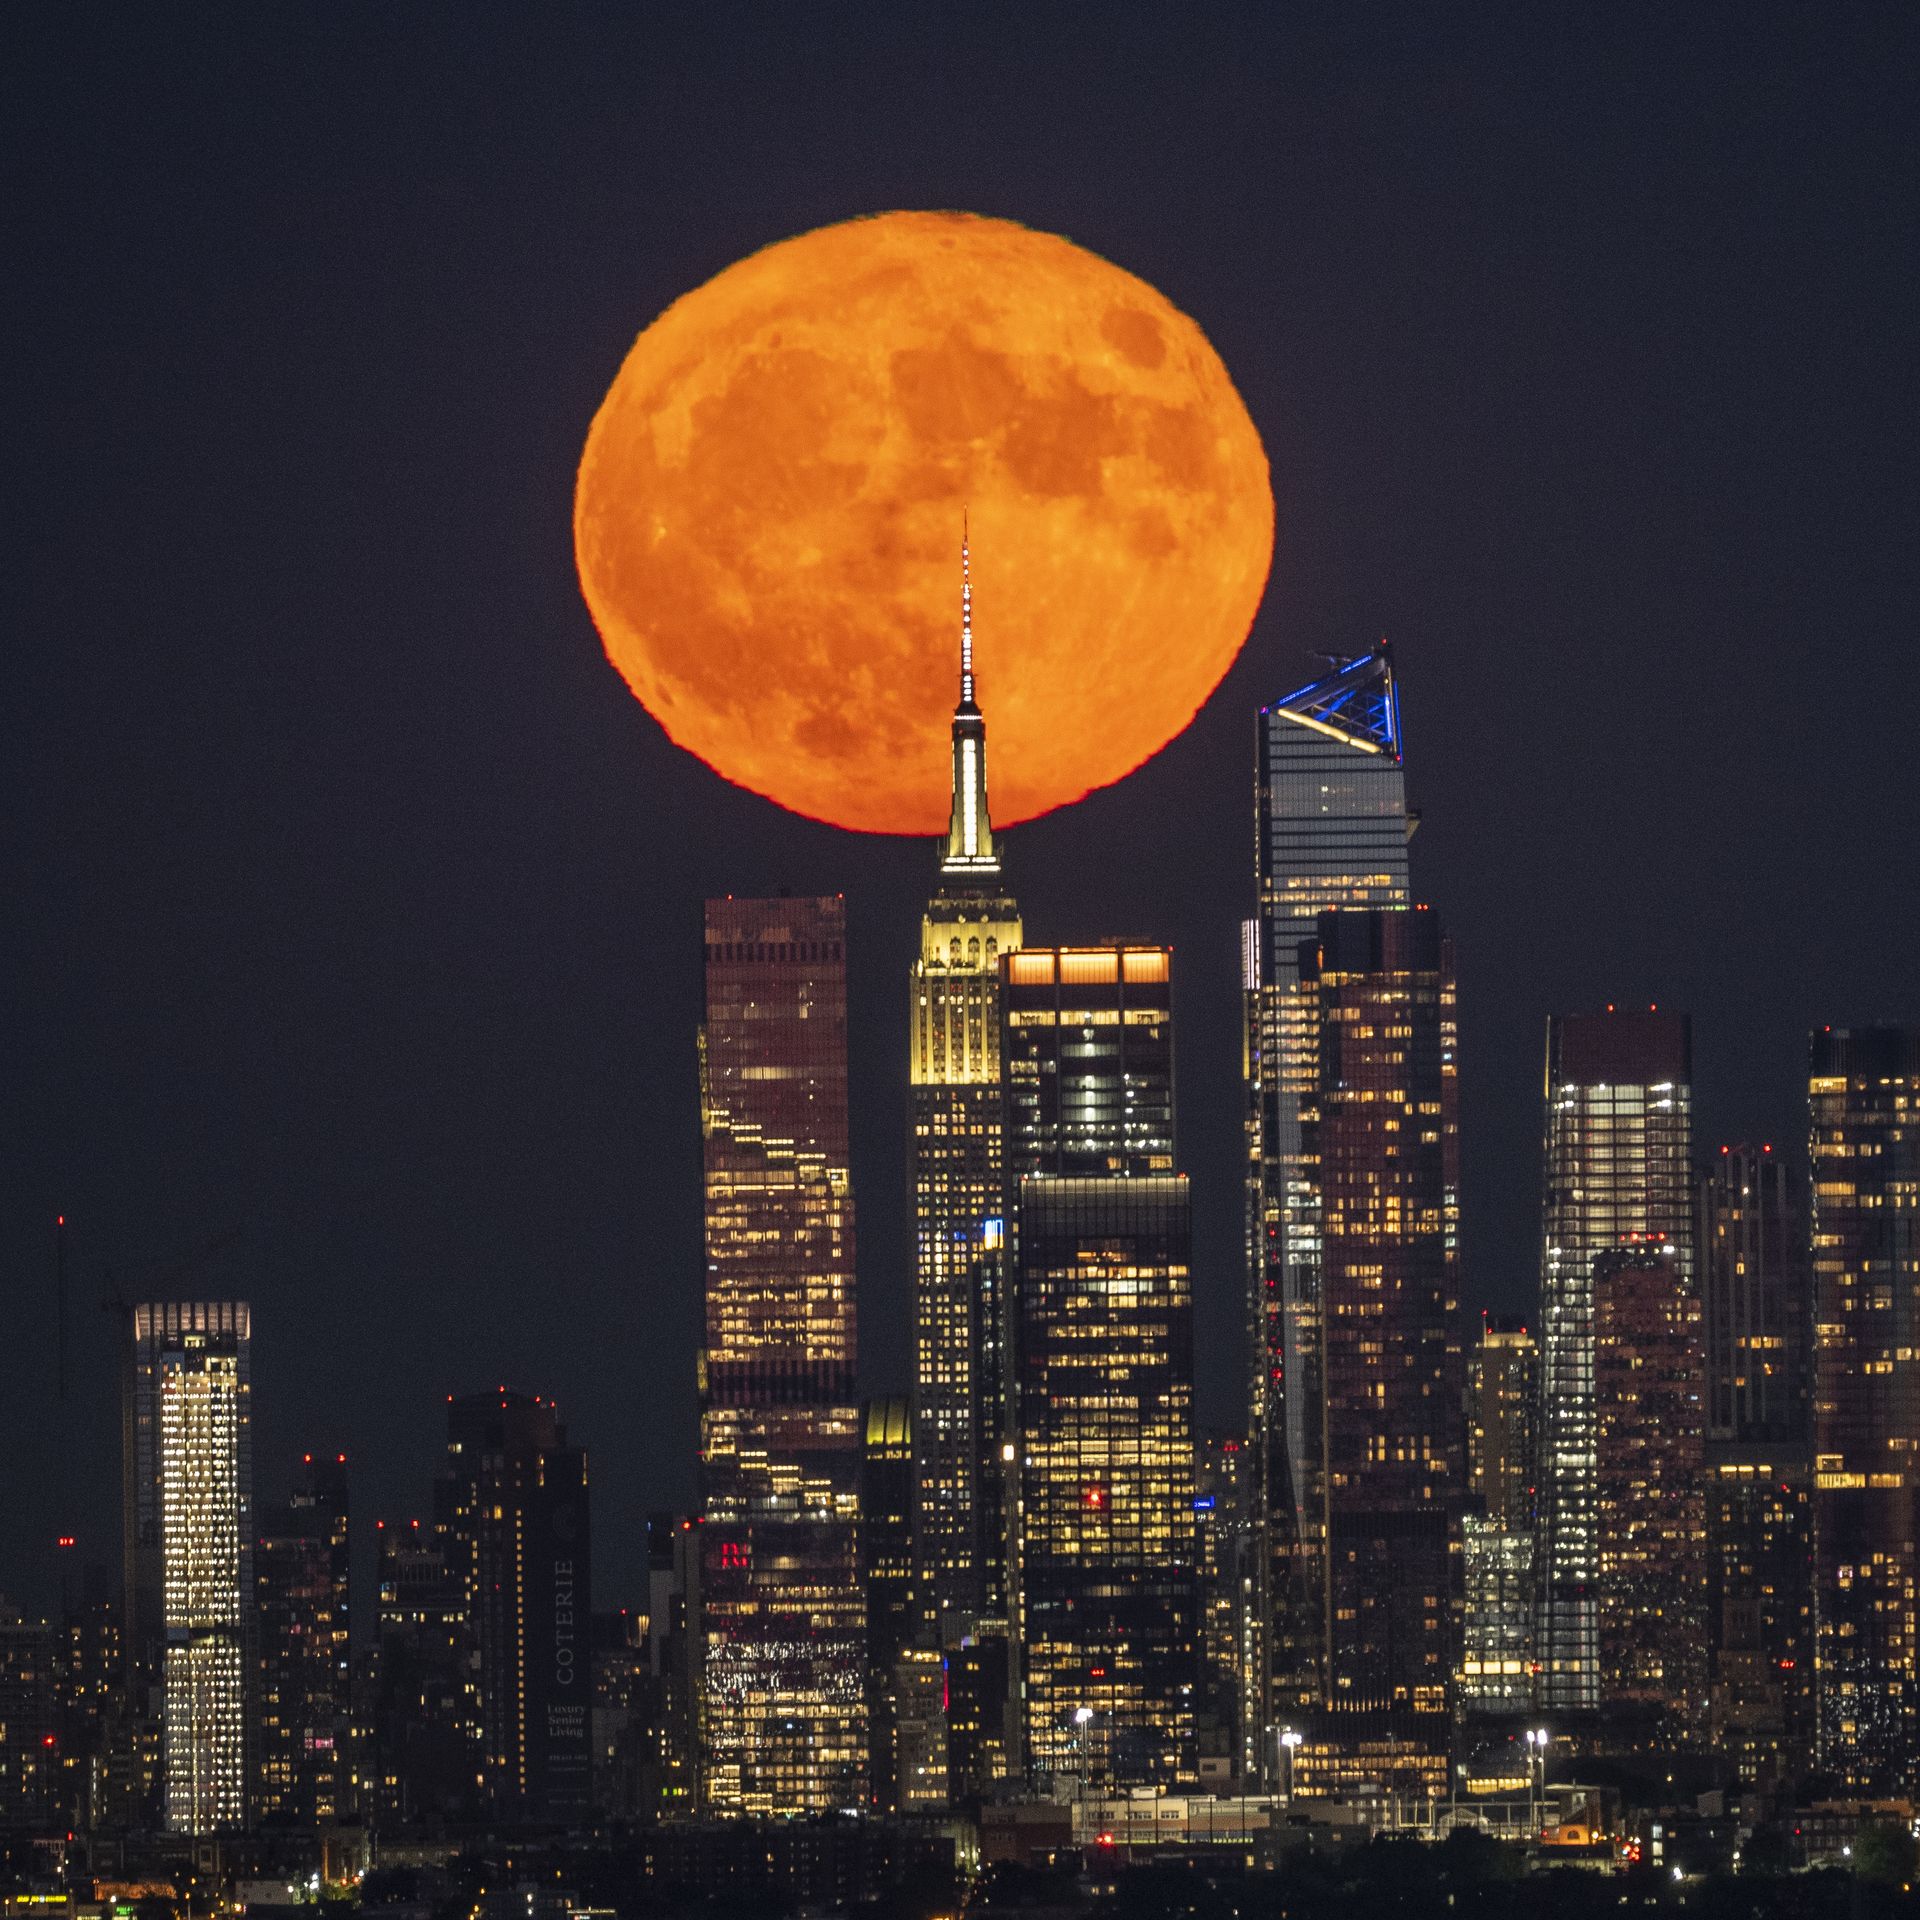 Where, when and how to see 2 supermoons this August